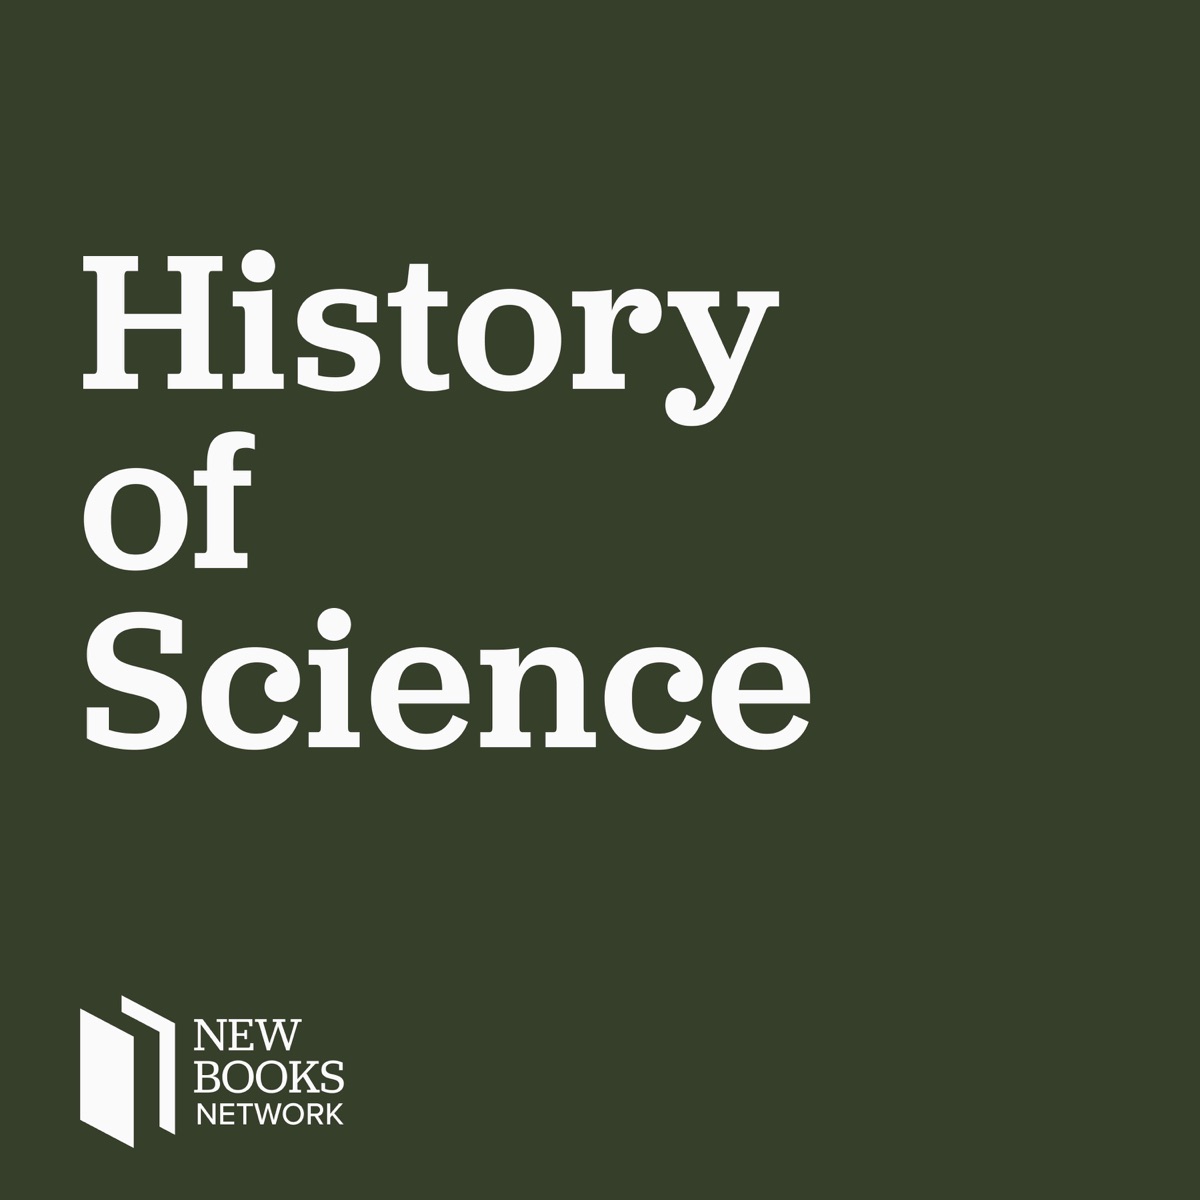 Shima Elhaj - New Books in the History of Science â€“ Podcast â€“ Podtail